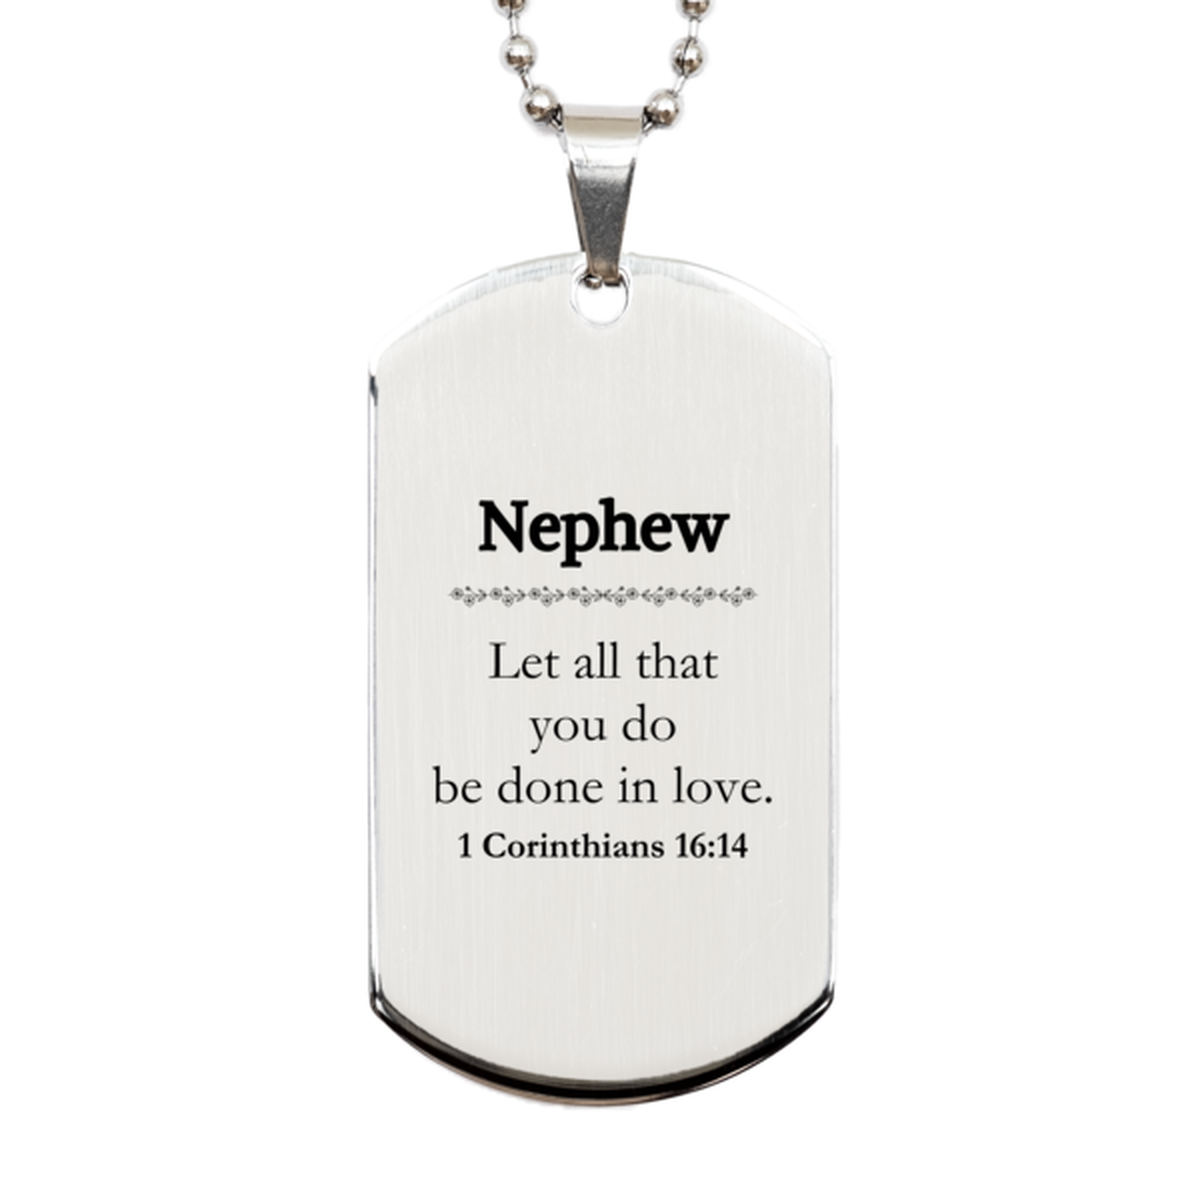 Christian Nephew Gifts, Let all that you do be done in love, Bible Verse Scripture Silver Dog Tag, Baptism Confirmation Gifts for Nephew